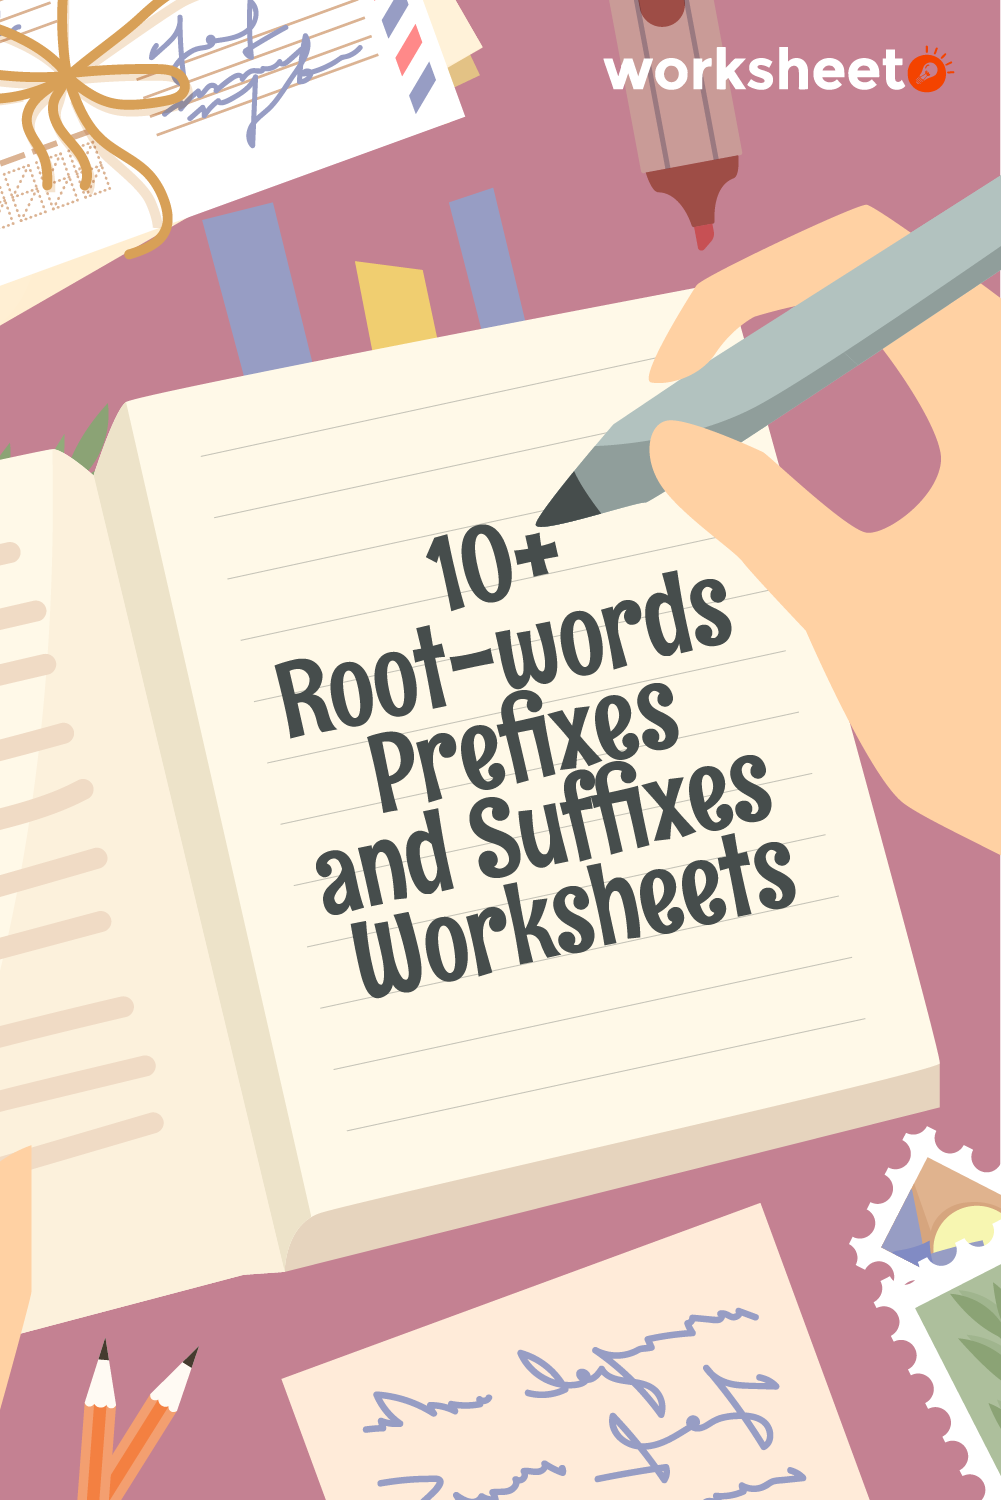 ROOT-WORDS Prefixes and Suffixes Worksheets